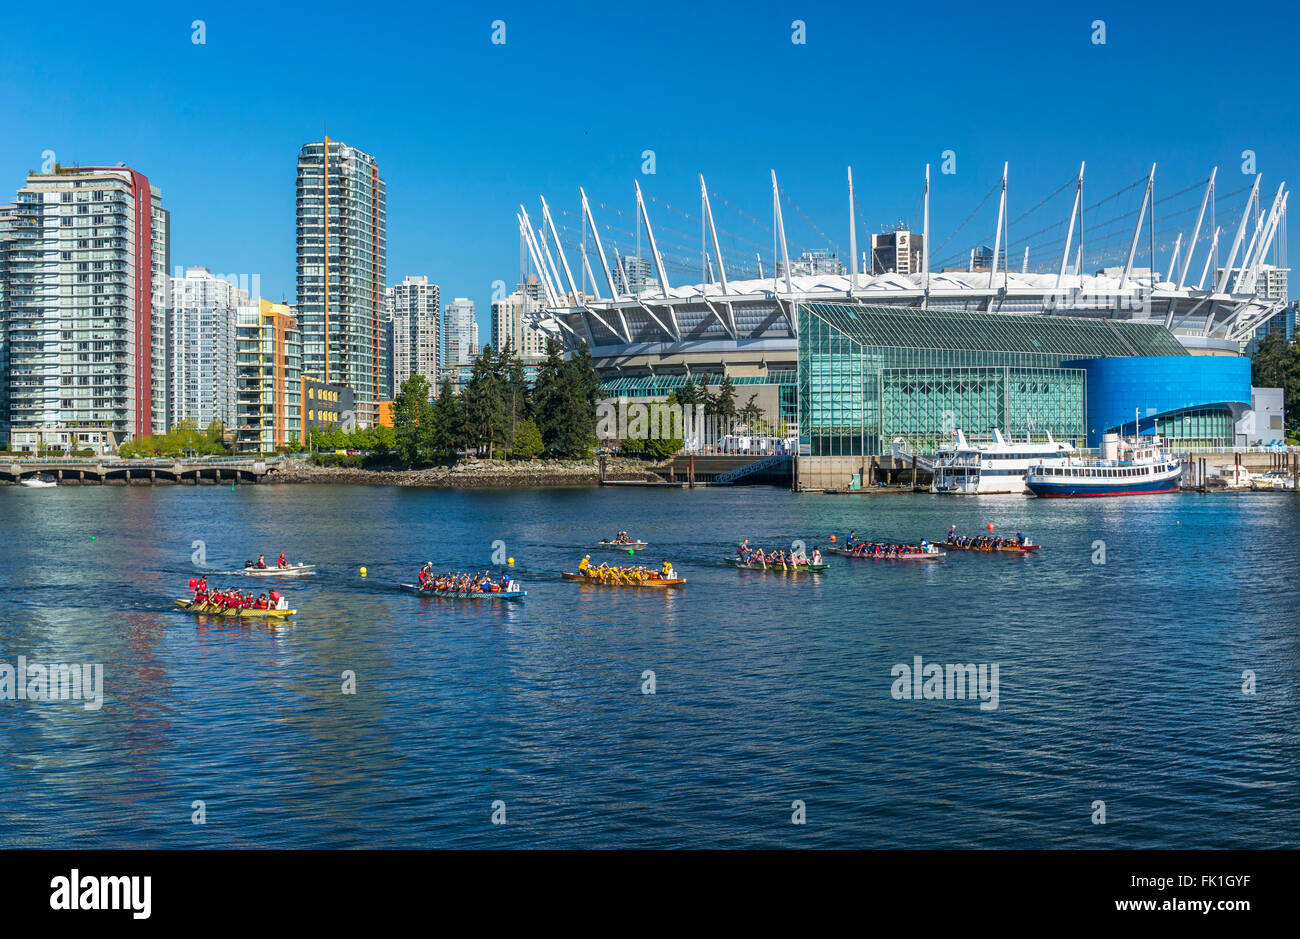 Rowers take part in dragon boat race at False Creek in Vancouver on May 05, 2013. Stock Photo